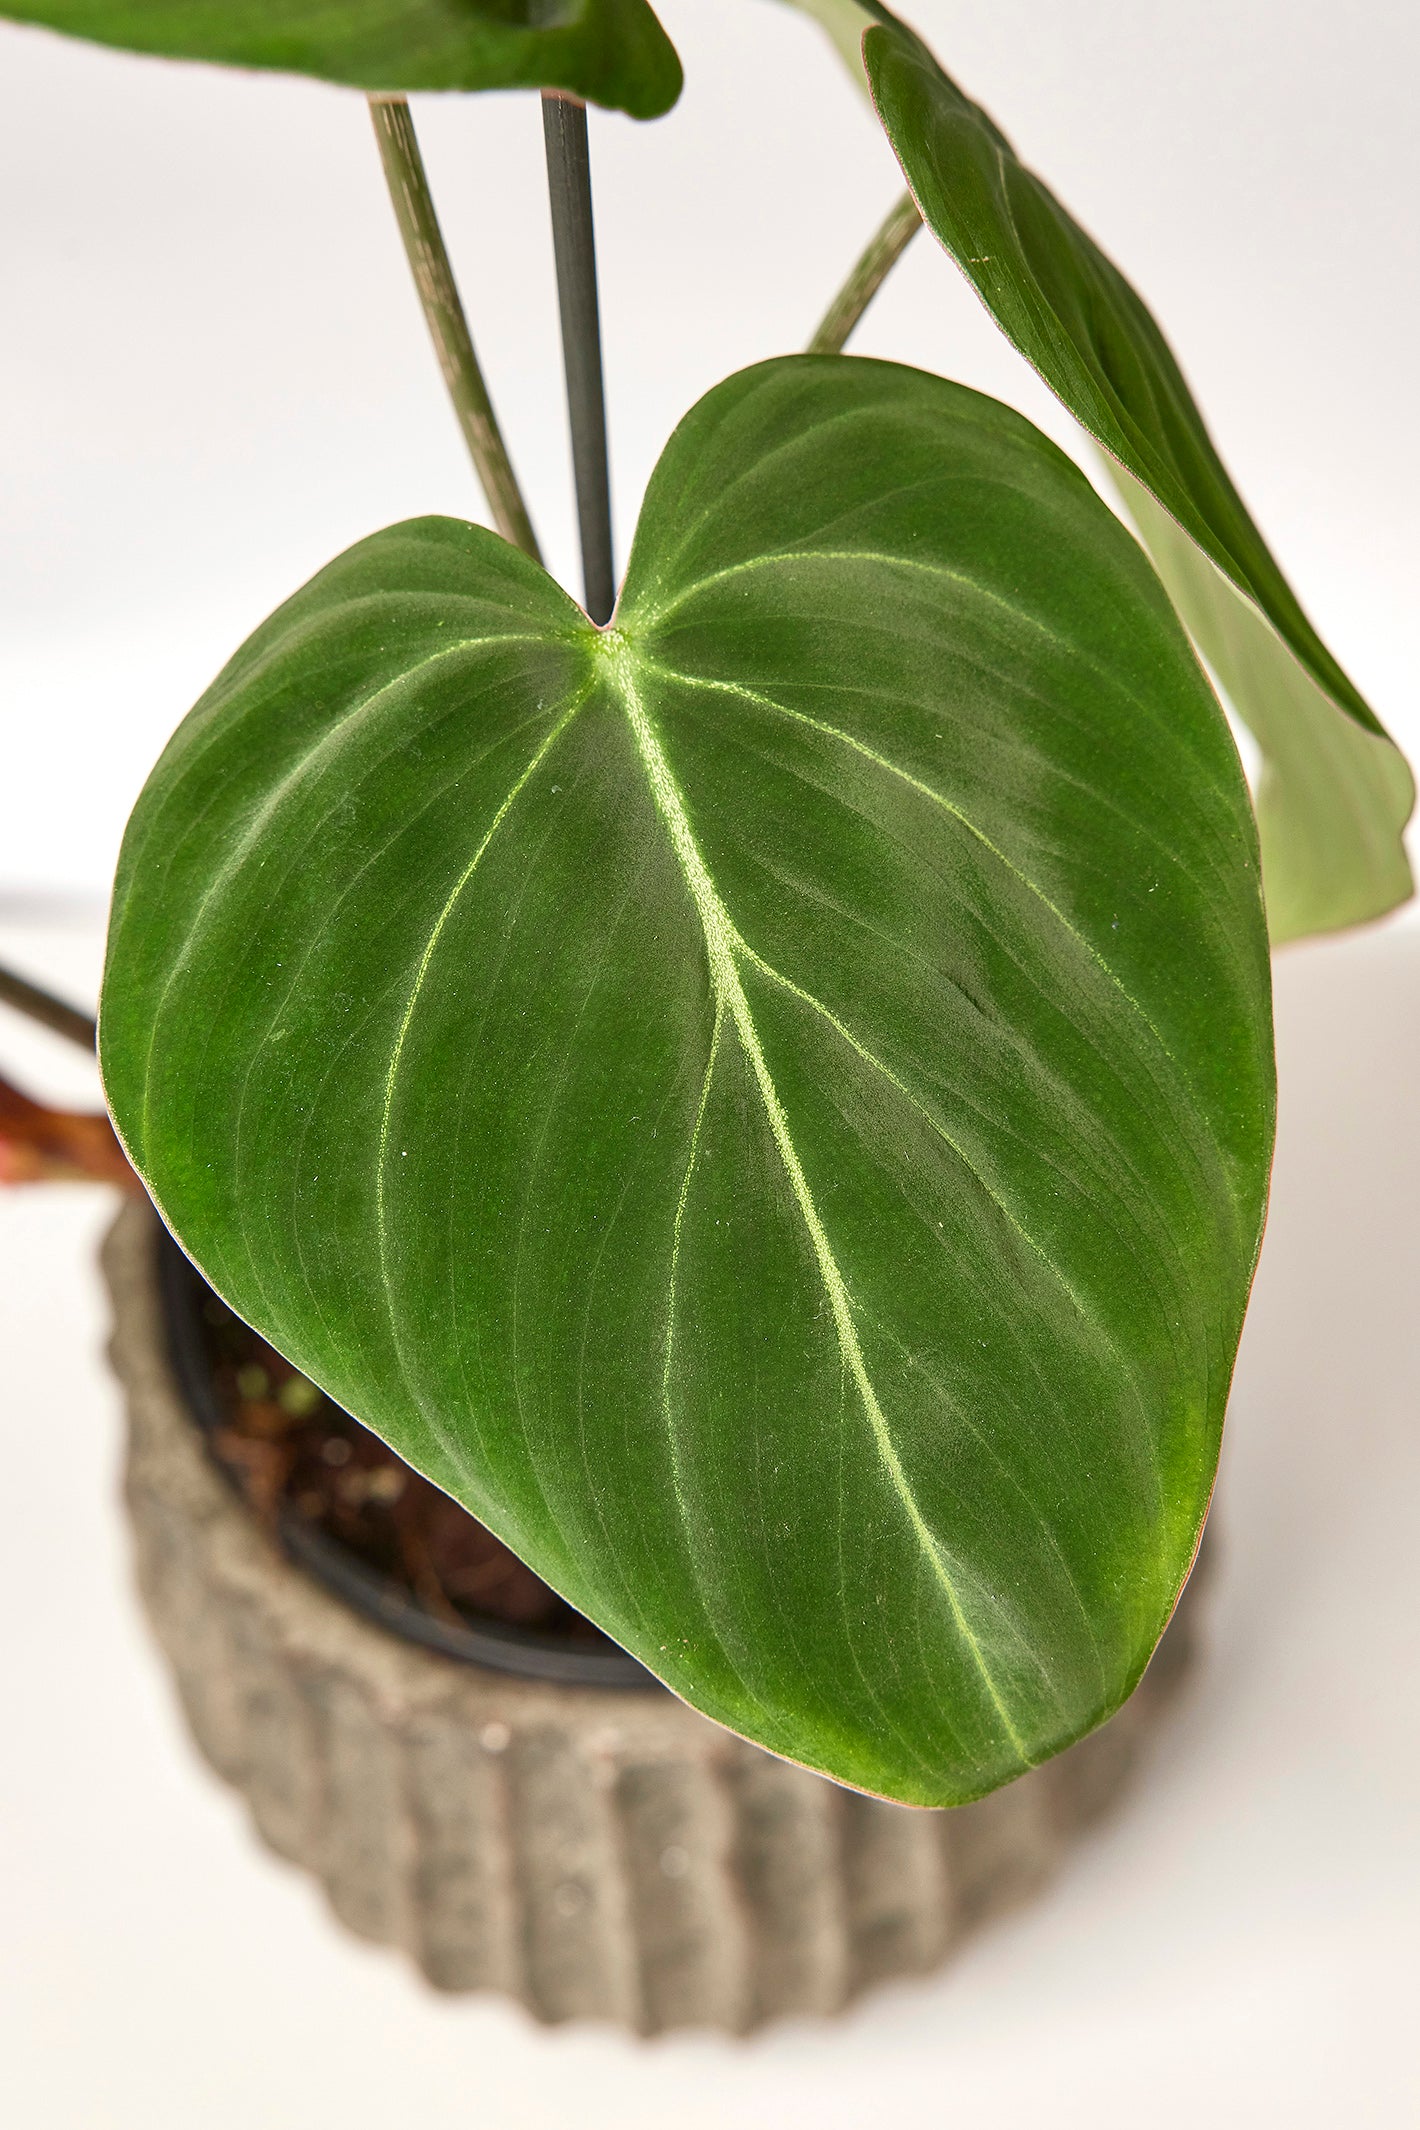 Philodendron gloriosum ''Compact Type" (Leaf Cutting)